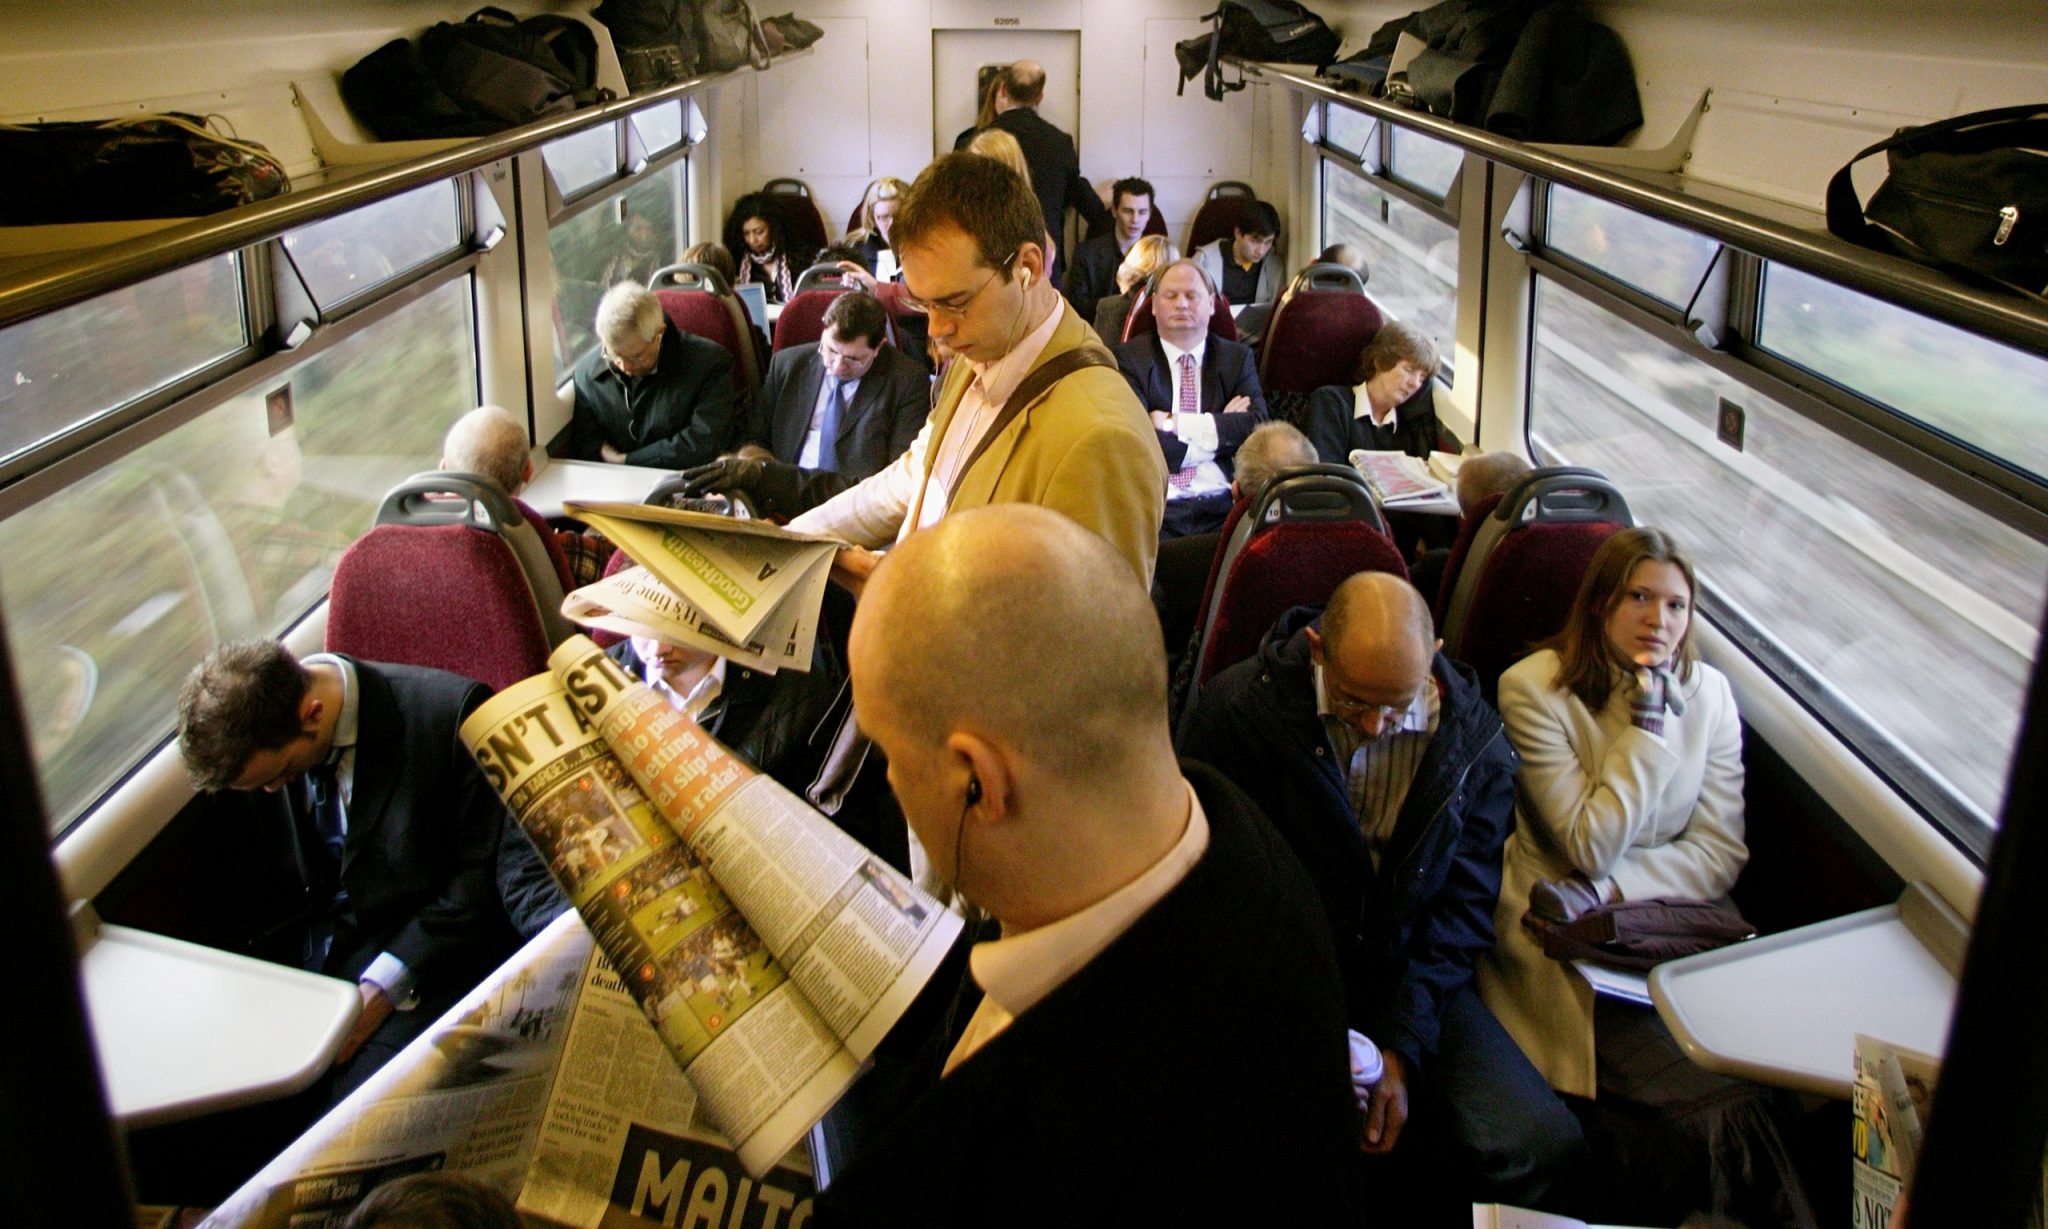 commuters on an overcrowd